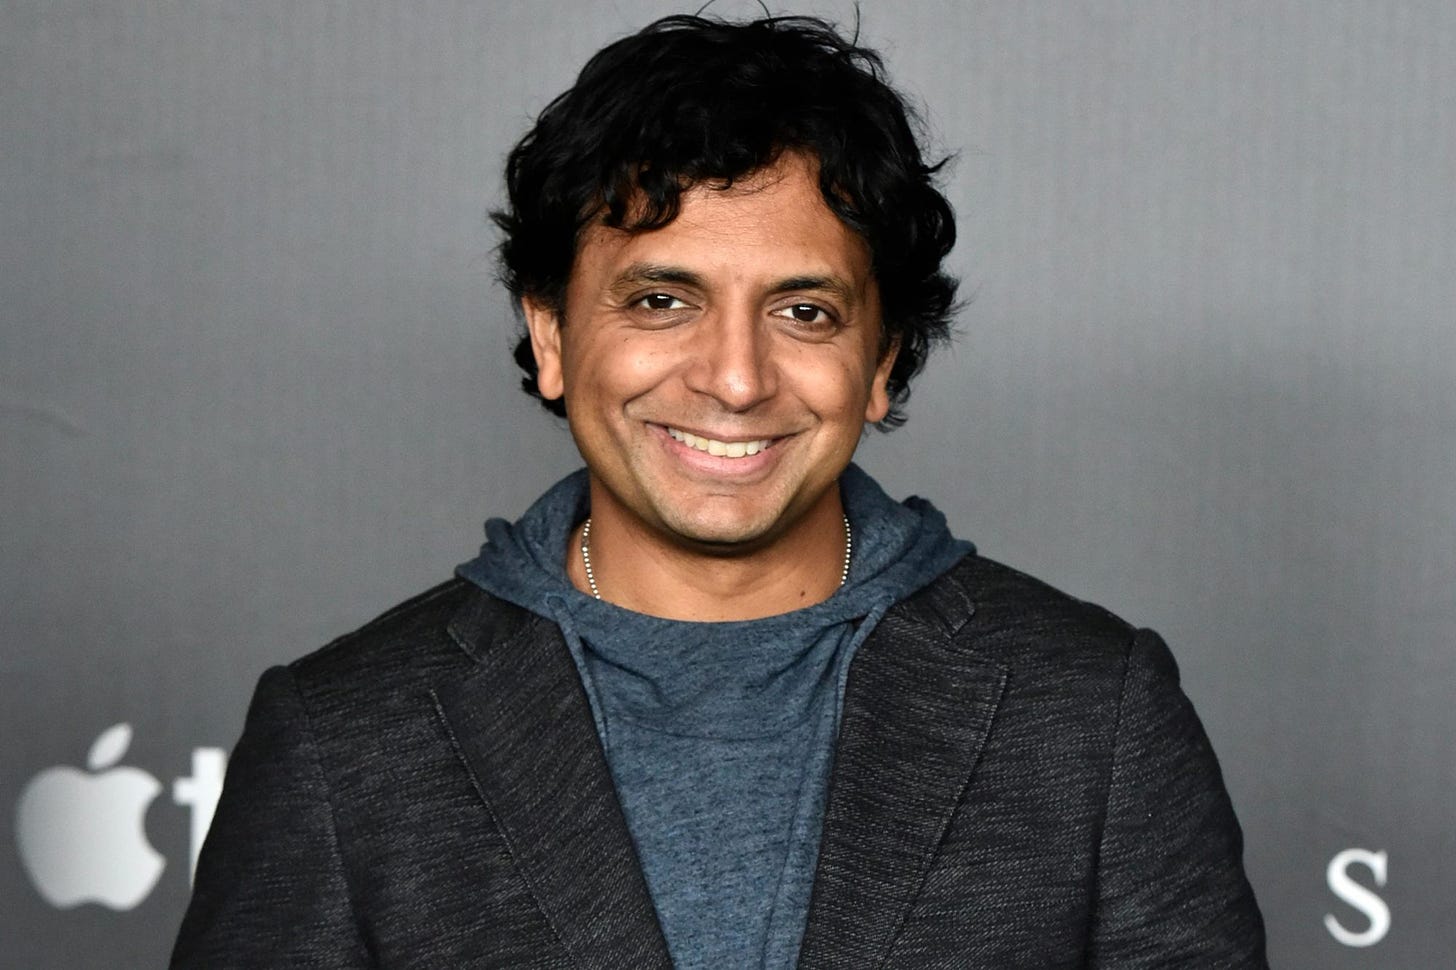 M. Night Shyamalan unveils title, poster for new movie | EW.com